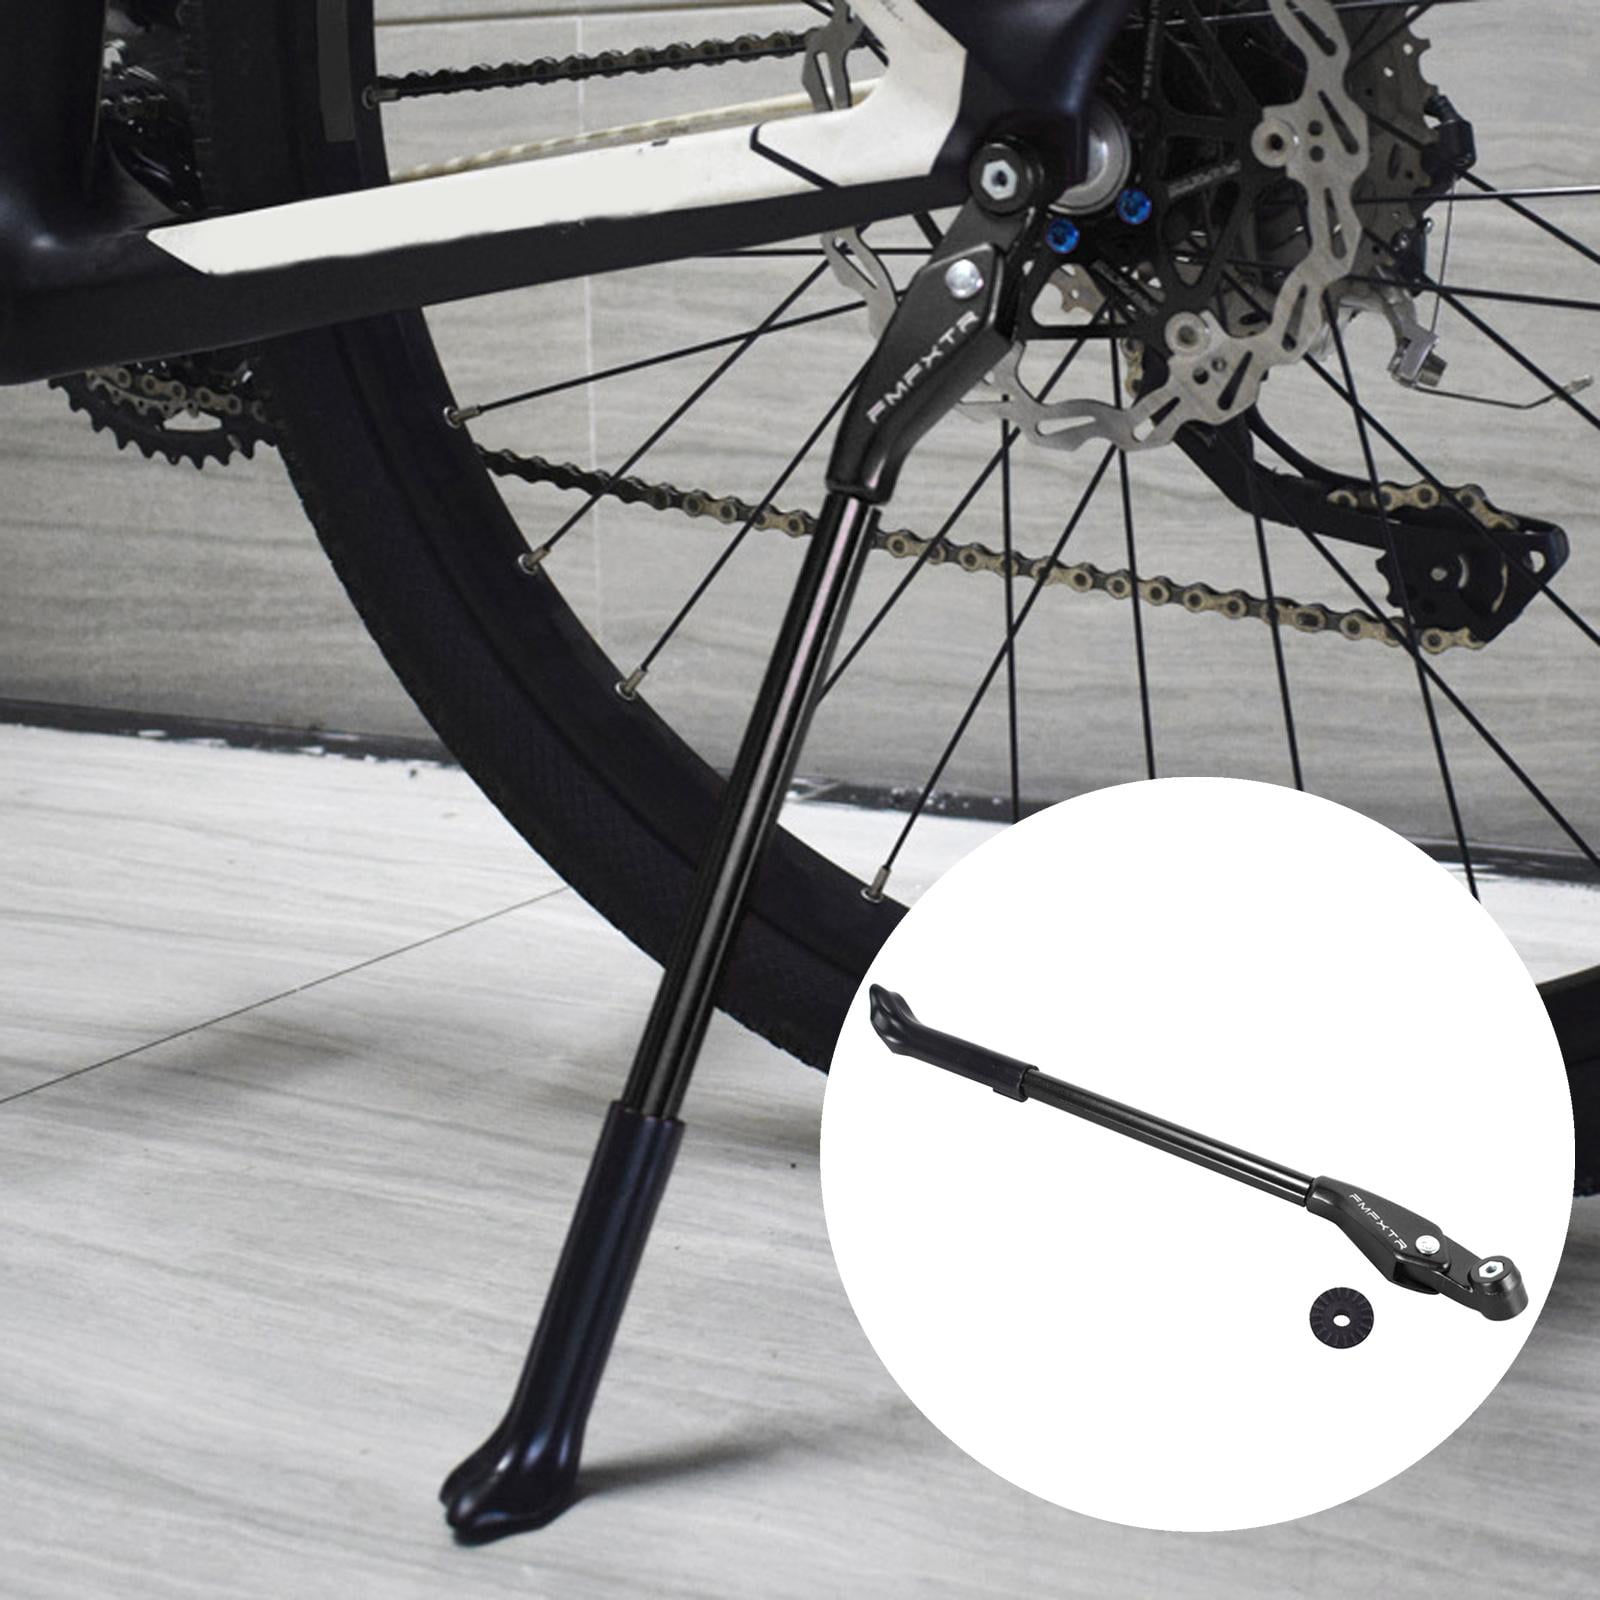 Robson Bicycle Kickstand Adjustable Bike Bracket Anti-Skid Bicycle Rear Kickstand Suitable for Bicycles with a Tire Diameter of 22-27 Only for Bicycles with Oval and Rectangular Chain Frames 